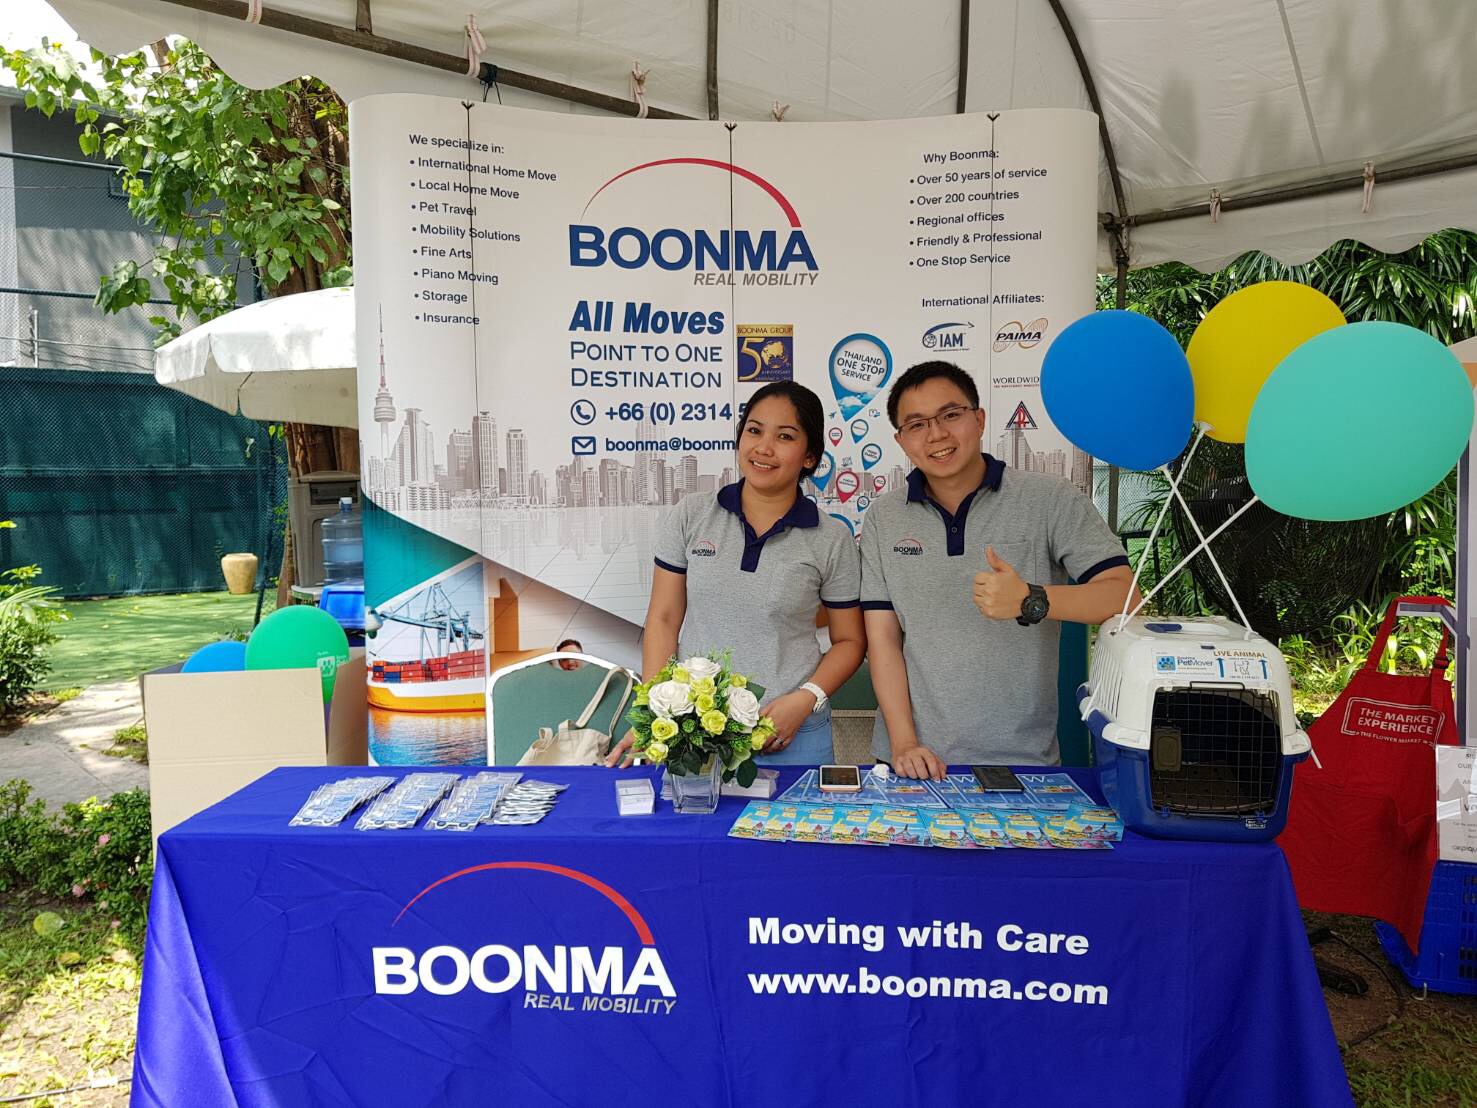 Boonma exhibition stand